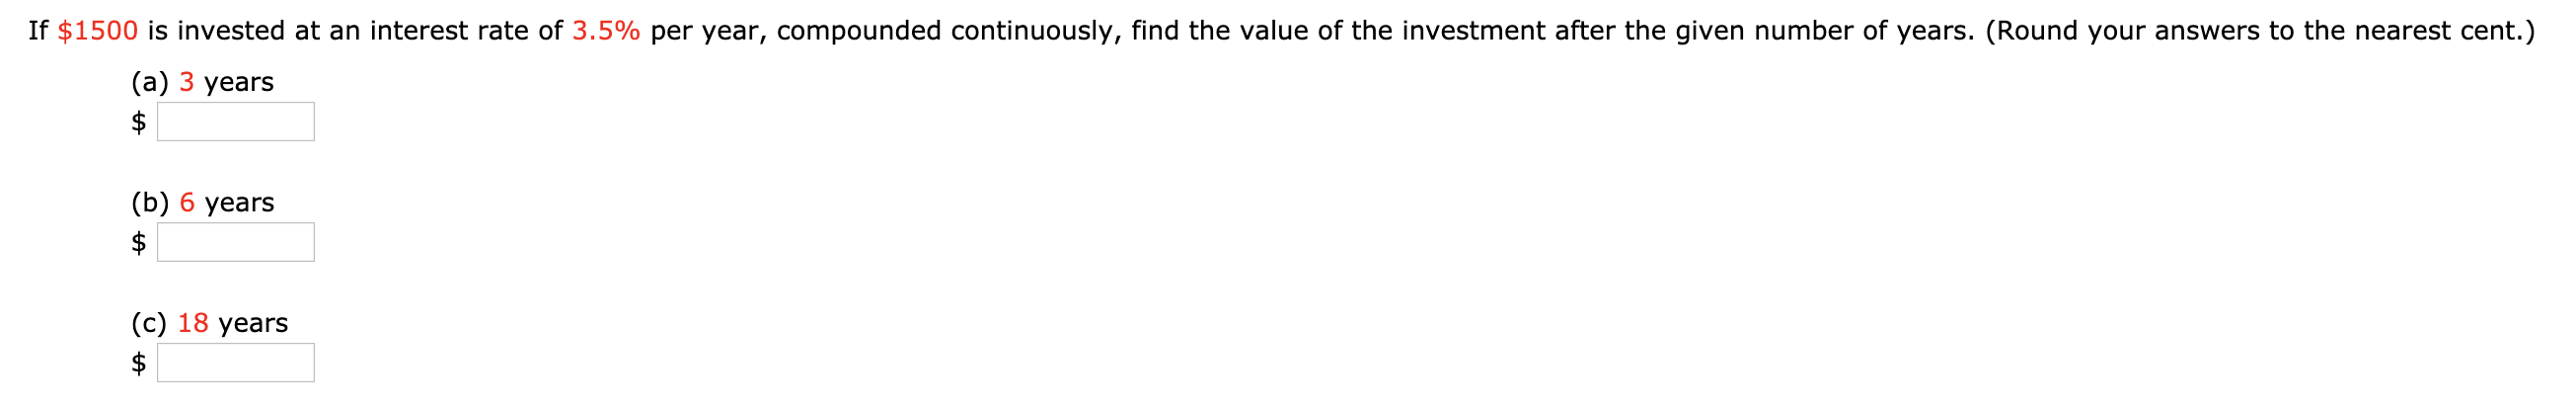 If $1500 is invested at an interest rate of 3.5% per year, compounded continuously, find the value of the investment after the given number of years. (Round your answers to the nearest cent.)
(а) 3 years
$
(b) 6 years
$
(c) 18 years
$
